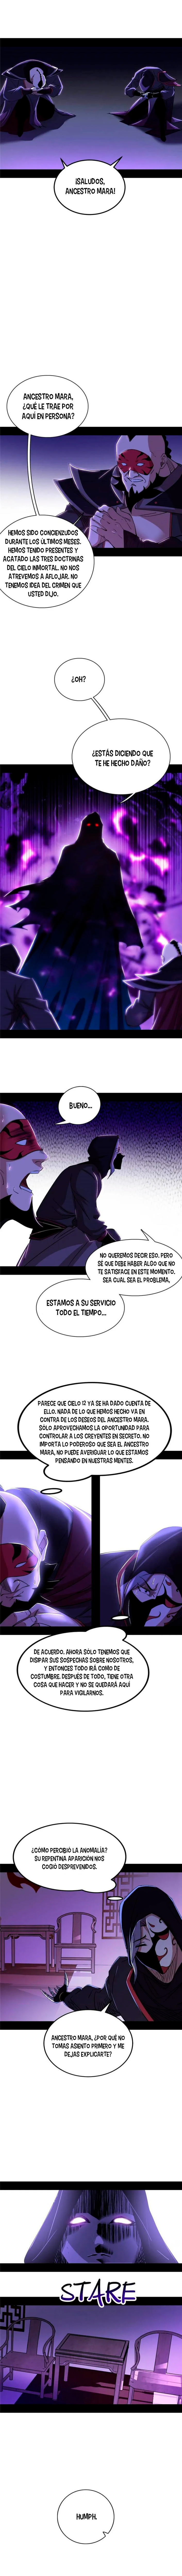 Manga Soy un dios maligno Chapter 320 image number 6